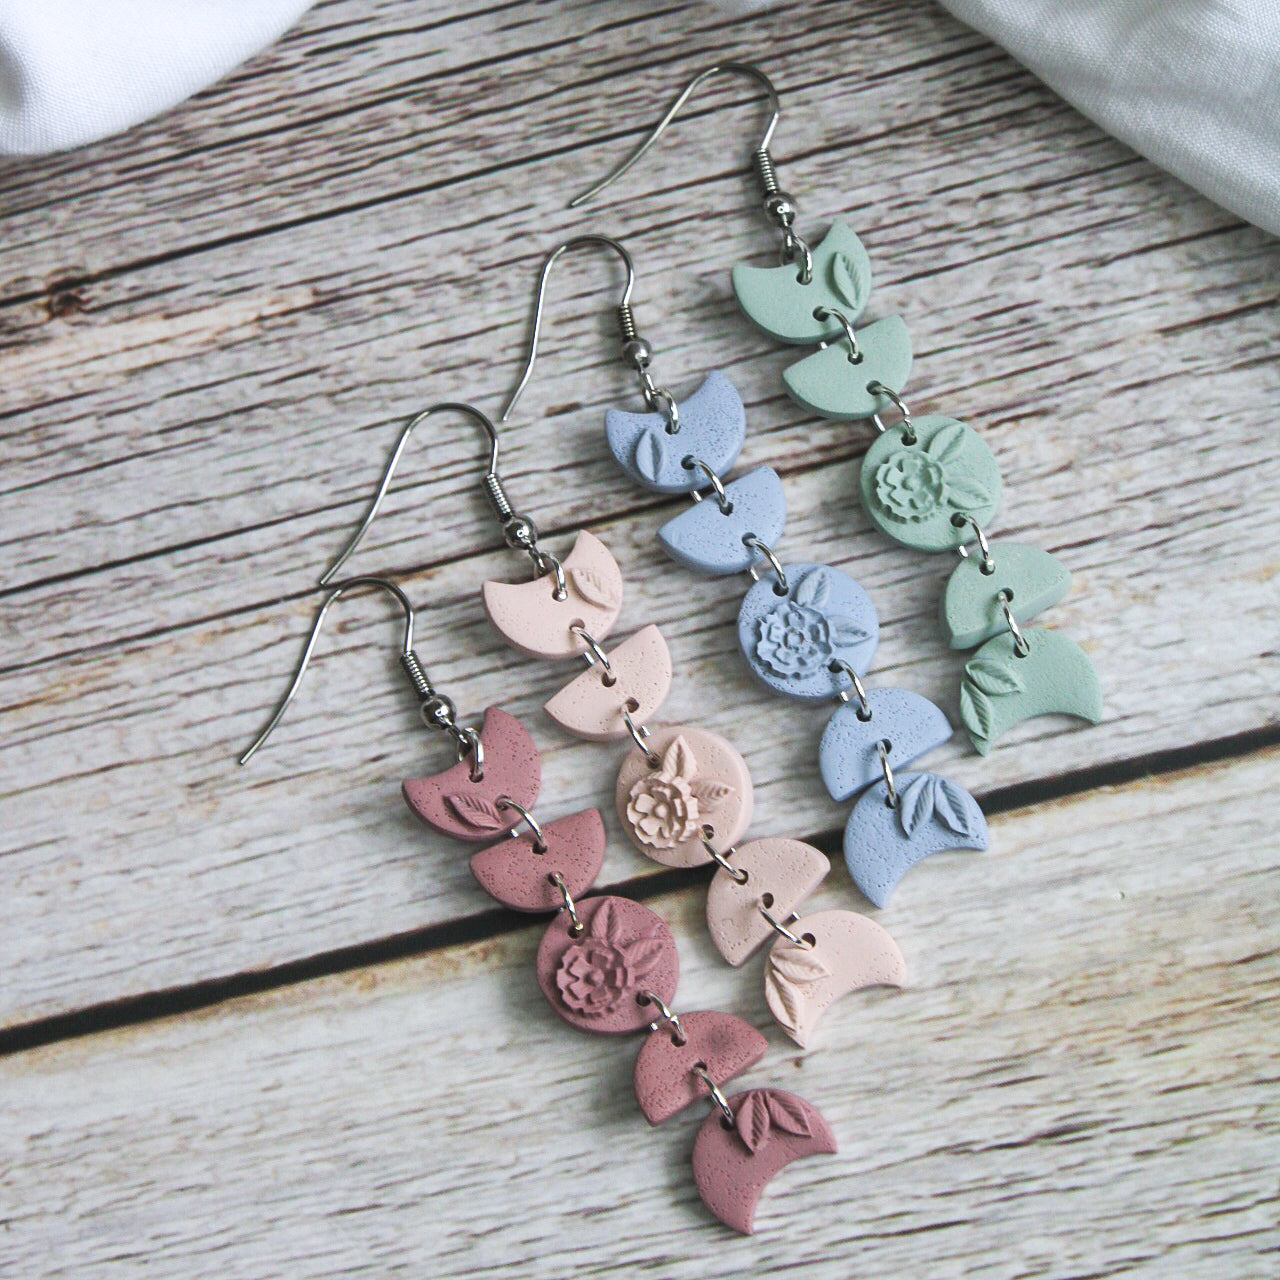 Moon phase earrings | Pastel polymer clay earrings | handmade gifts for her NZ